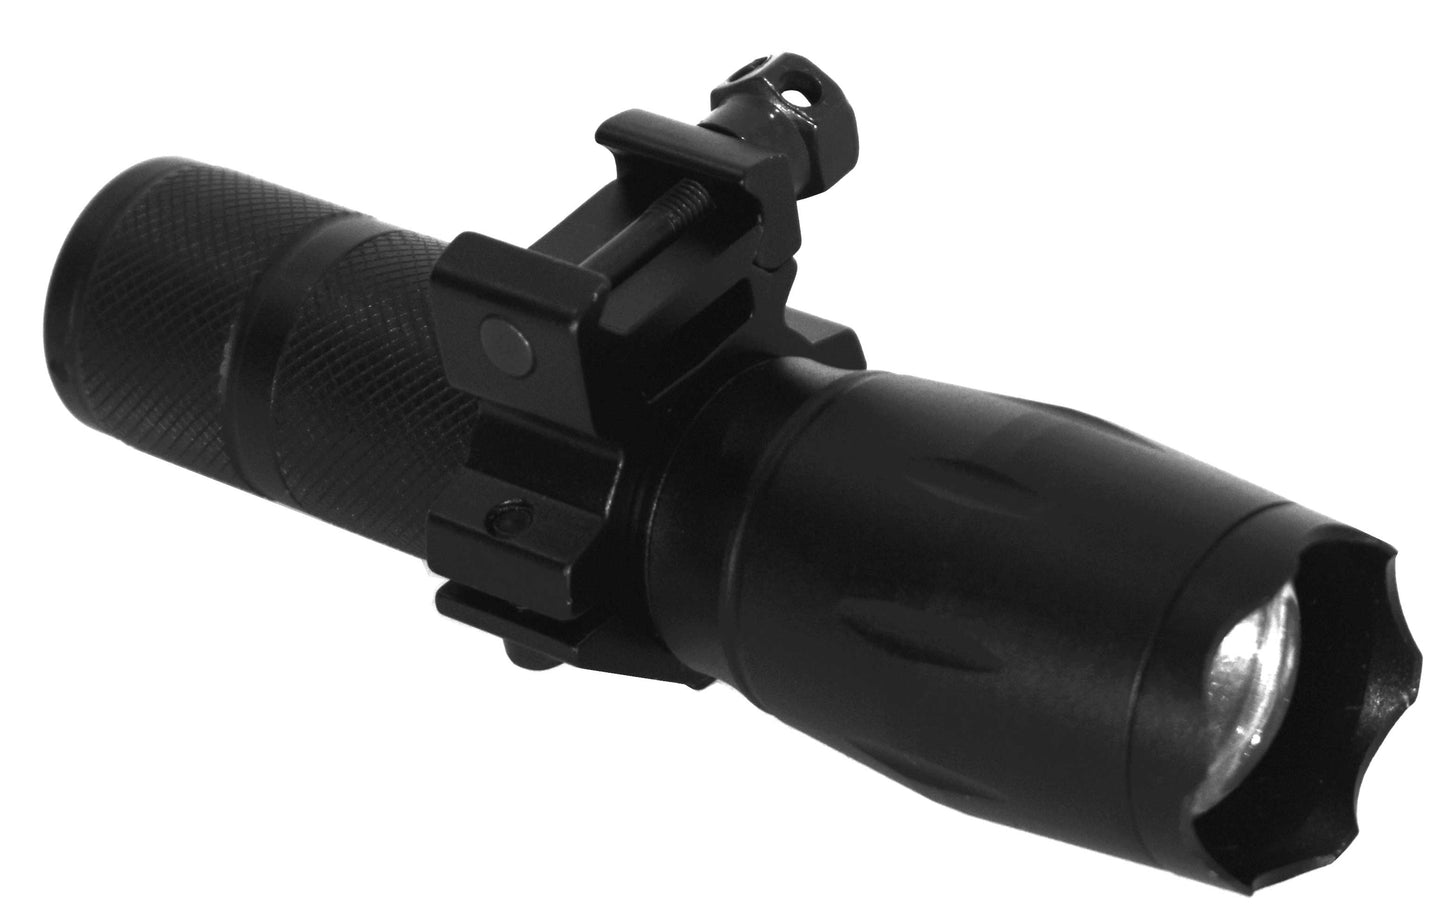 Tactical 1000 Lumen Flashlight With Mount Compatible With Mossberg 500 12 Gauge Pumps.